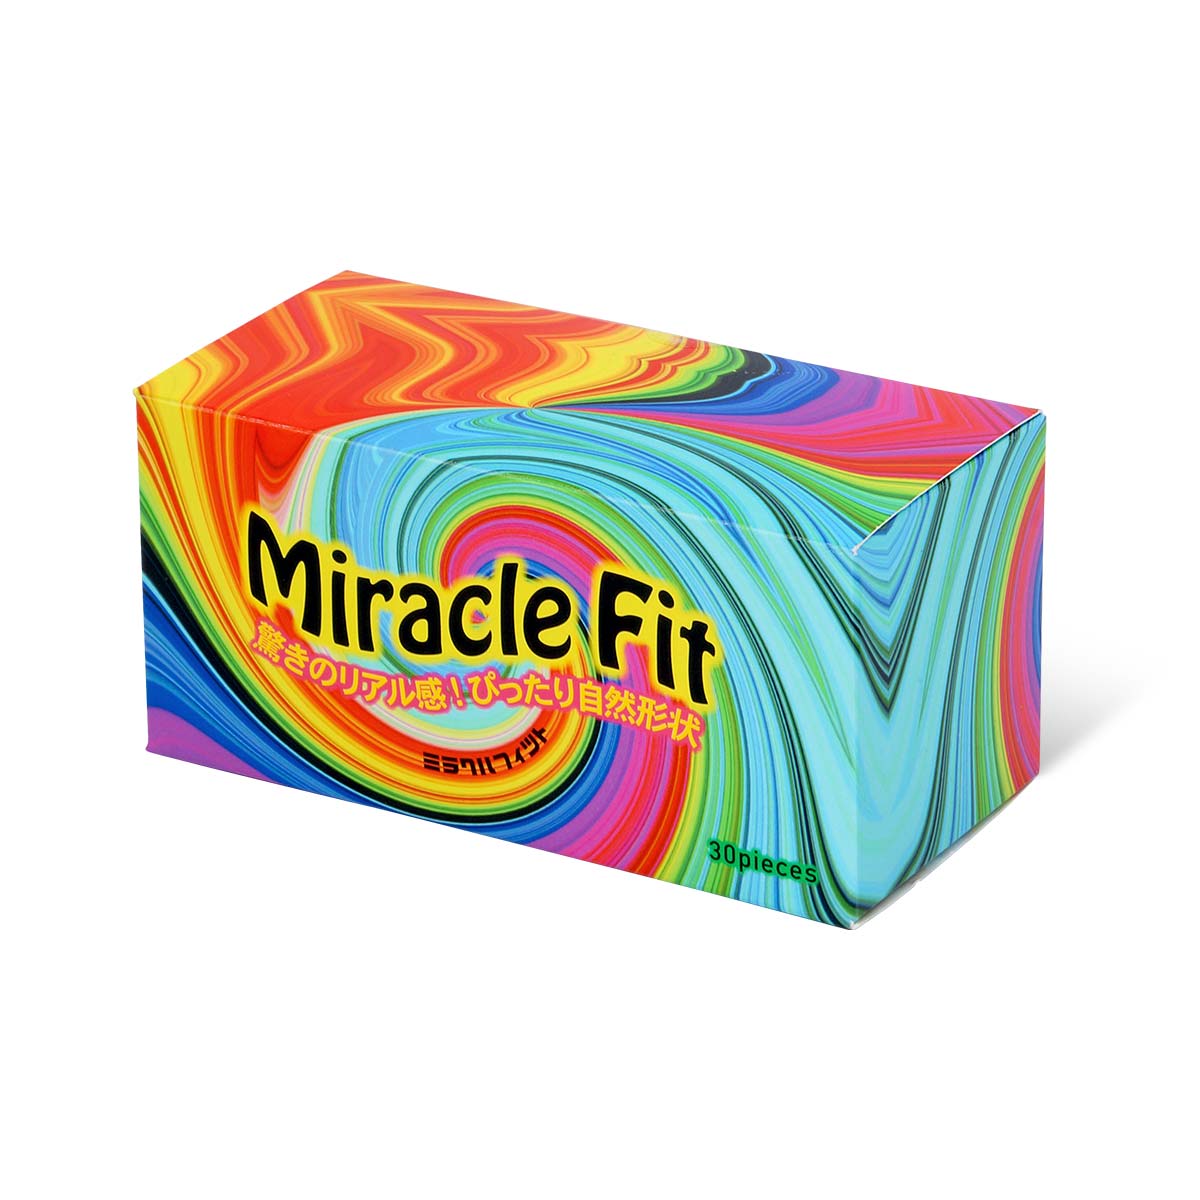 Sagami Miracle Fit 51mm 30's Pack Latex Condom-p_1